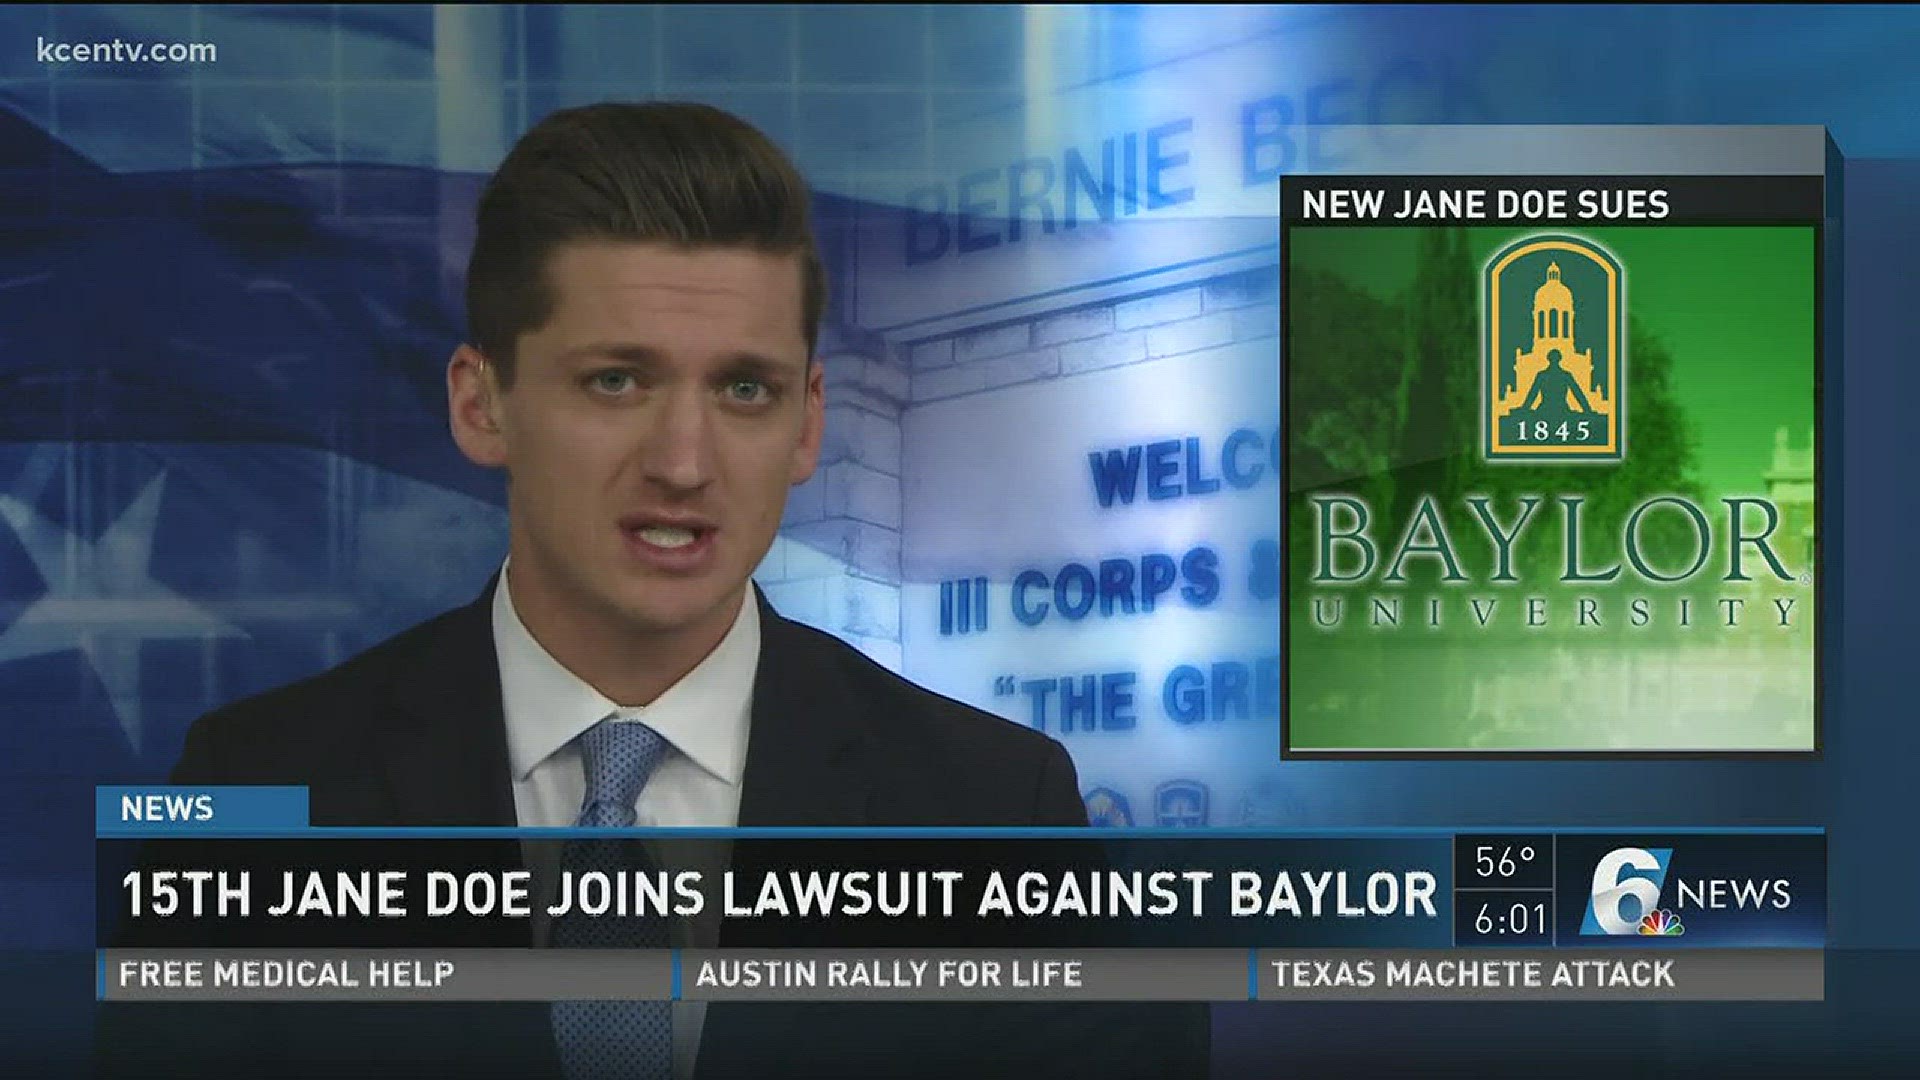 The plaintiffs claim Baylor lied to them and failed to protect victims of sexual assault.